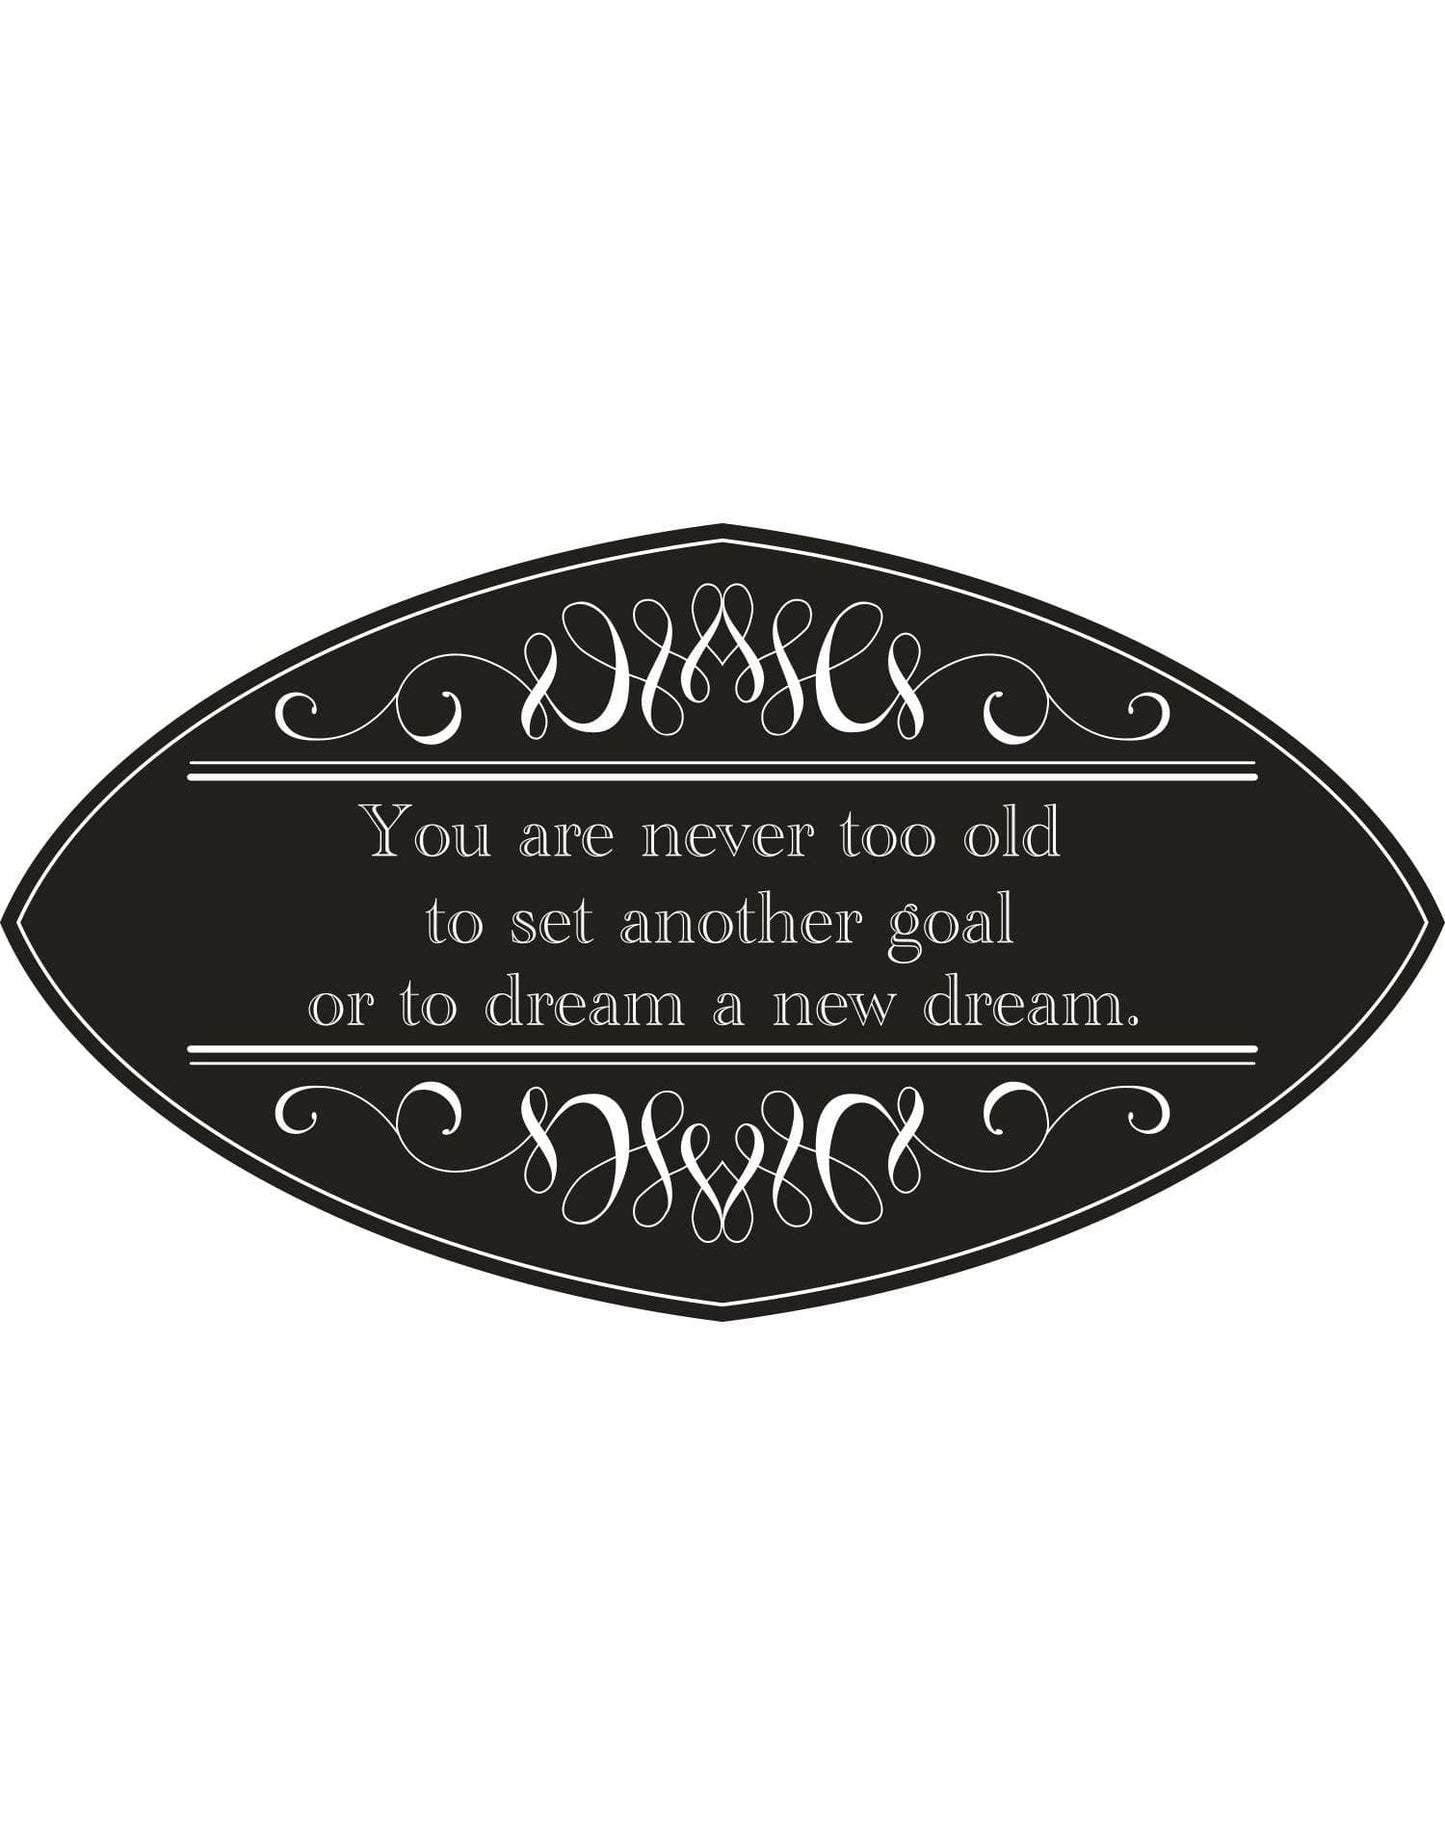 "You are never too old to set another goal or a dream a new dream." Motivational Quote wall decal. #5355